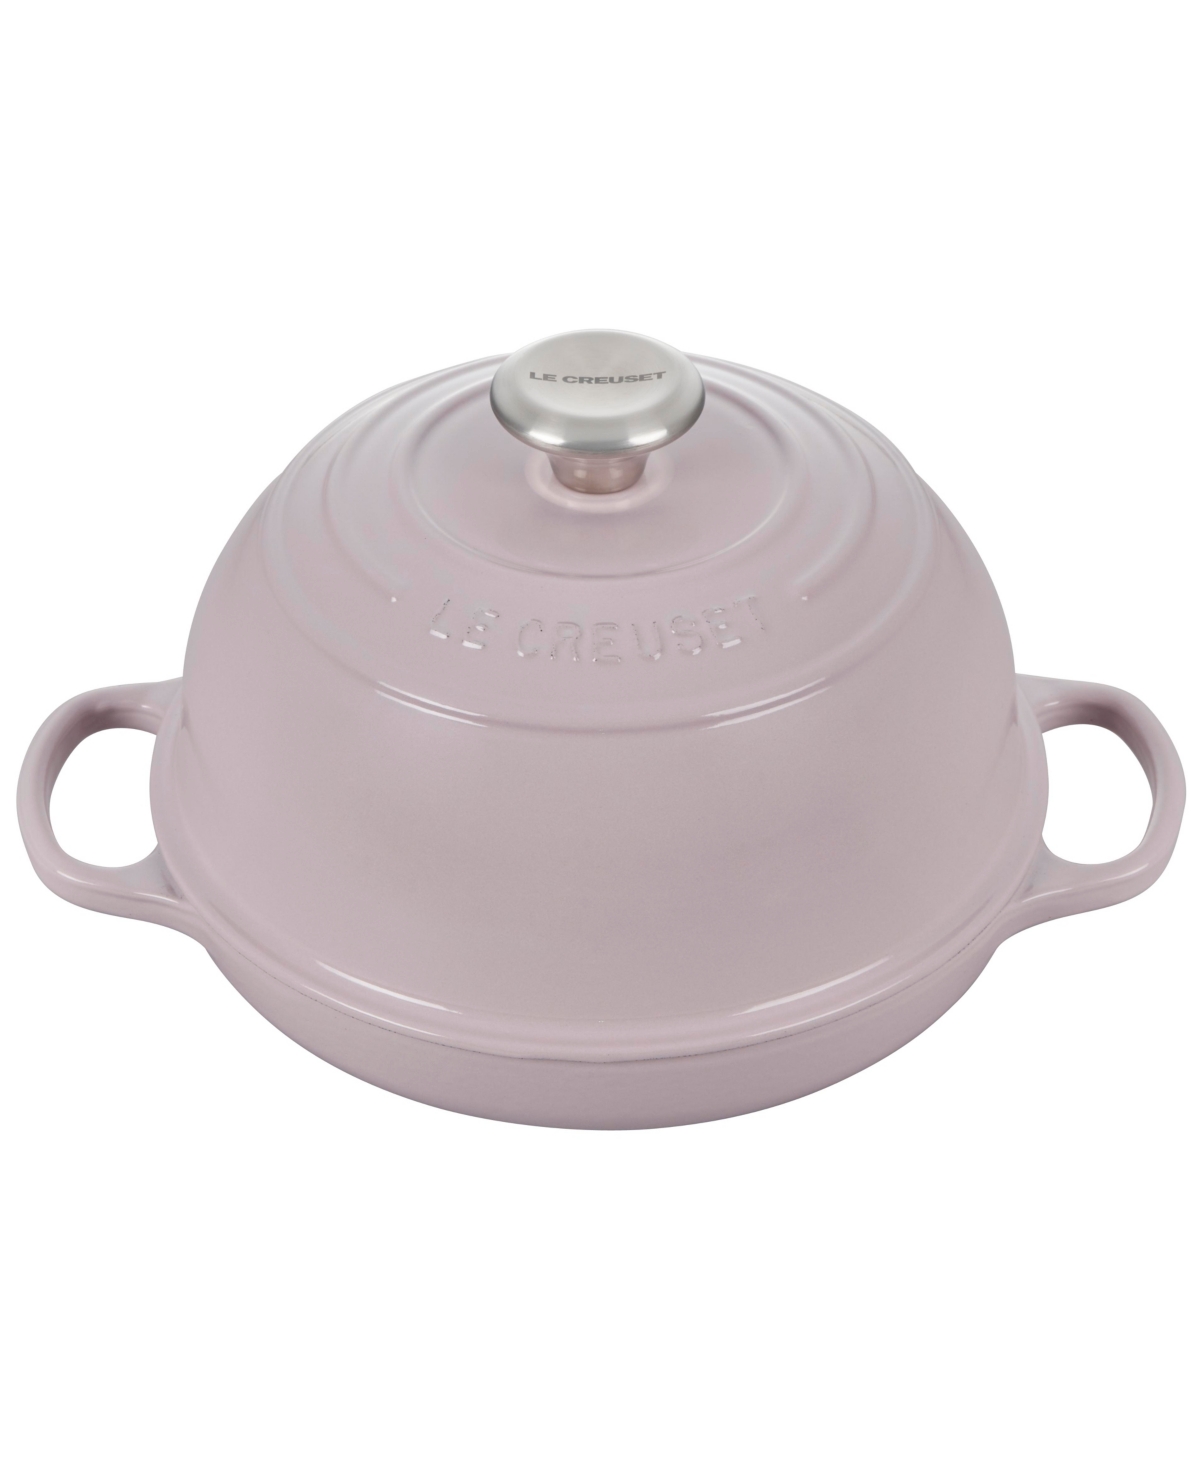 Le Creuset 1.75 Qt Enameled Cast Iron Bread Oven With Lid In Shallot